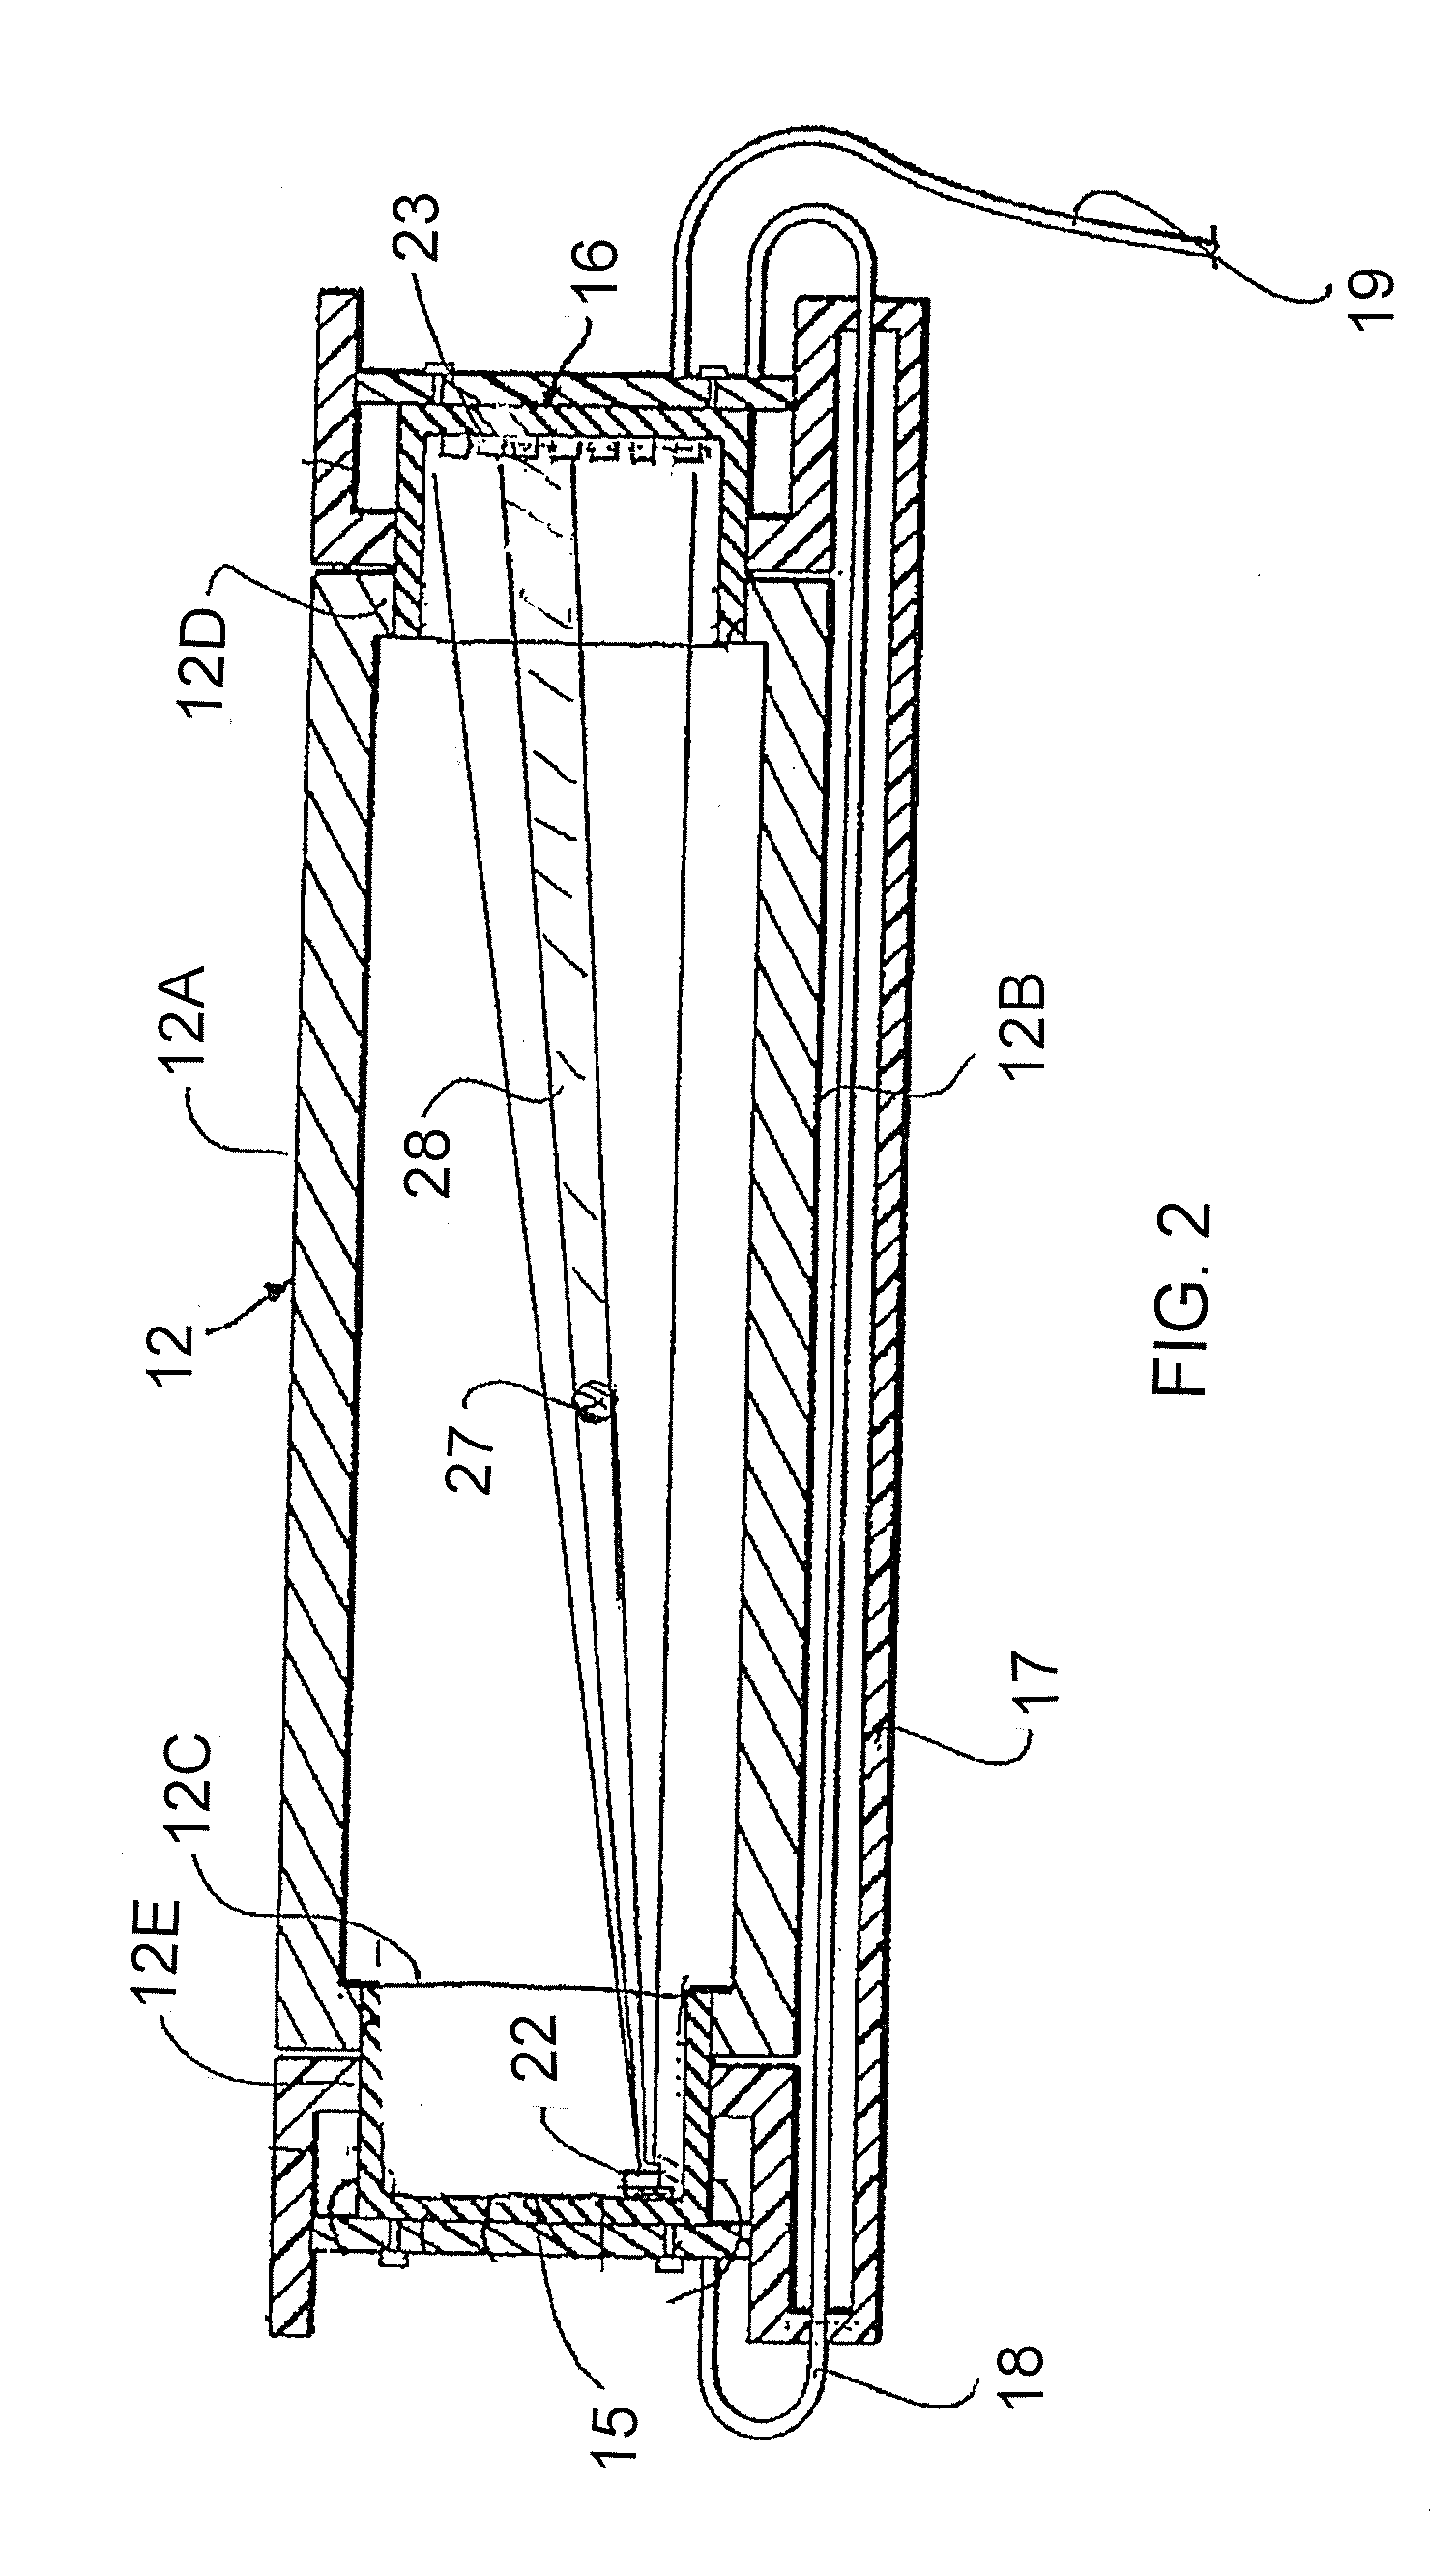 Seed counting apparatus for a planter monitor